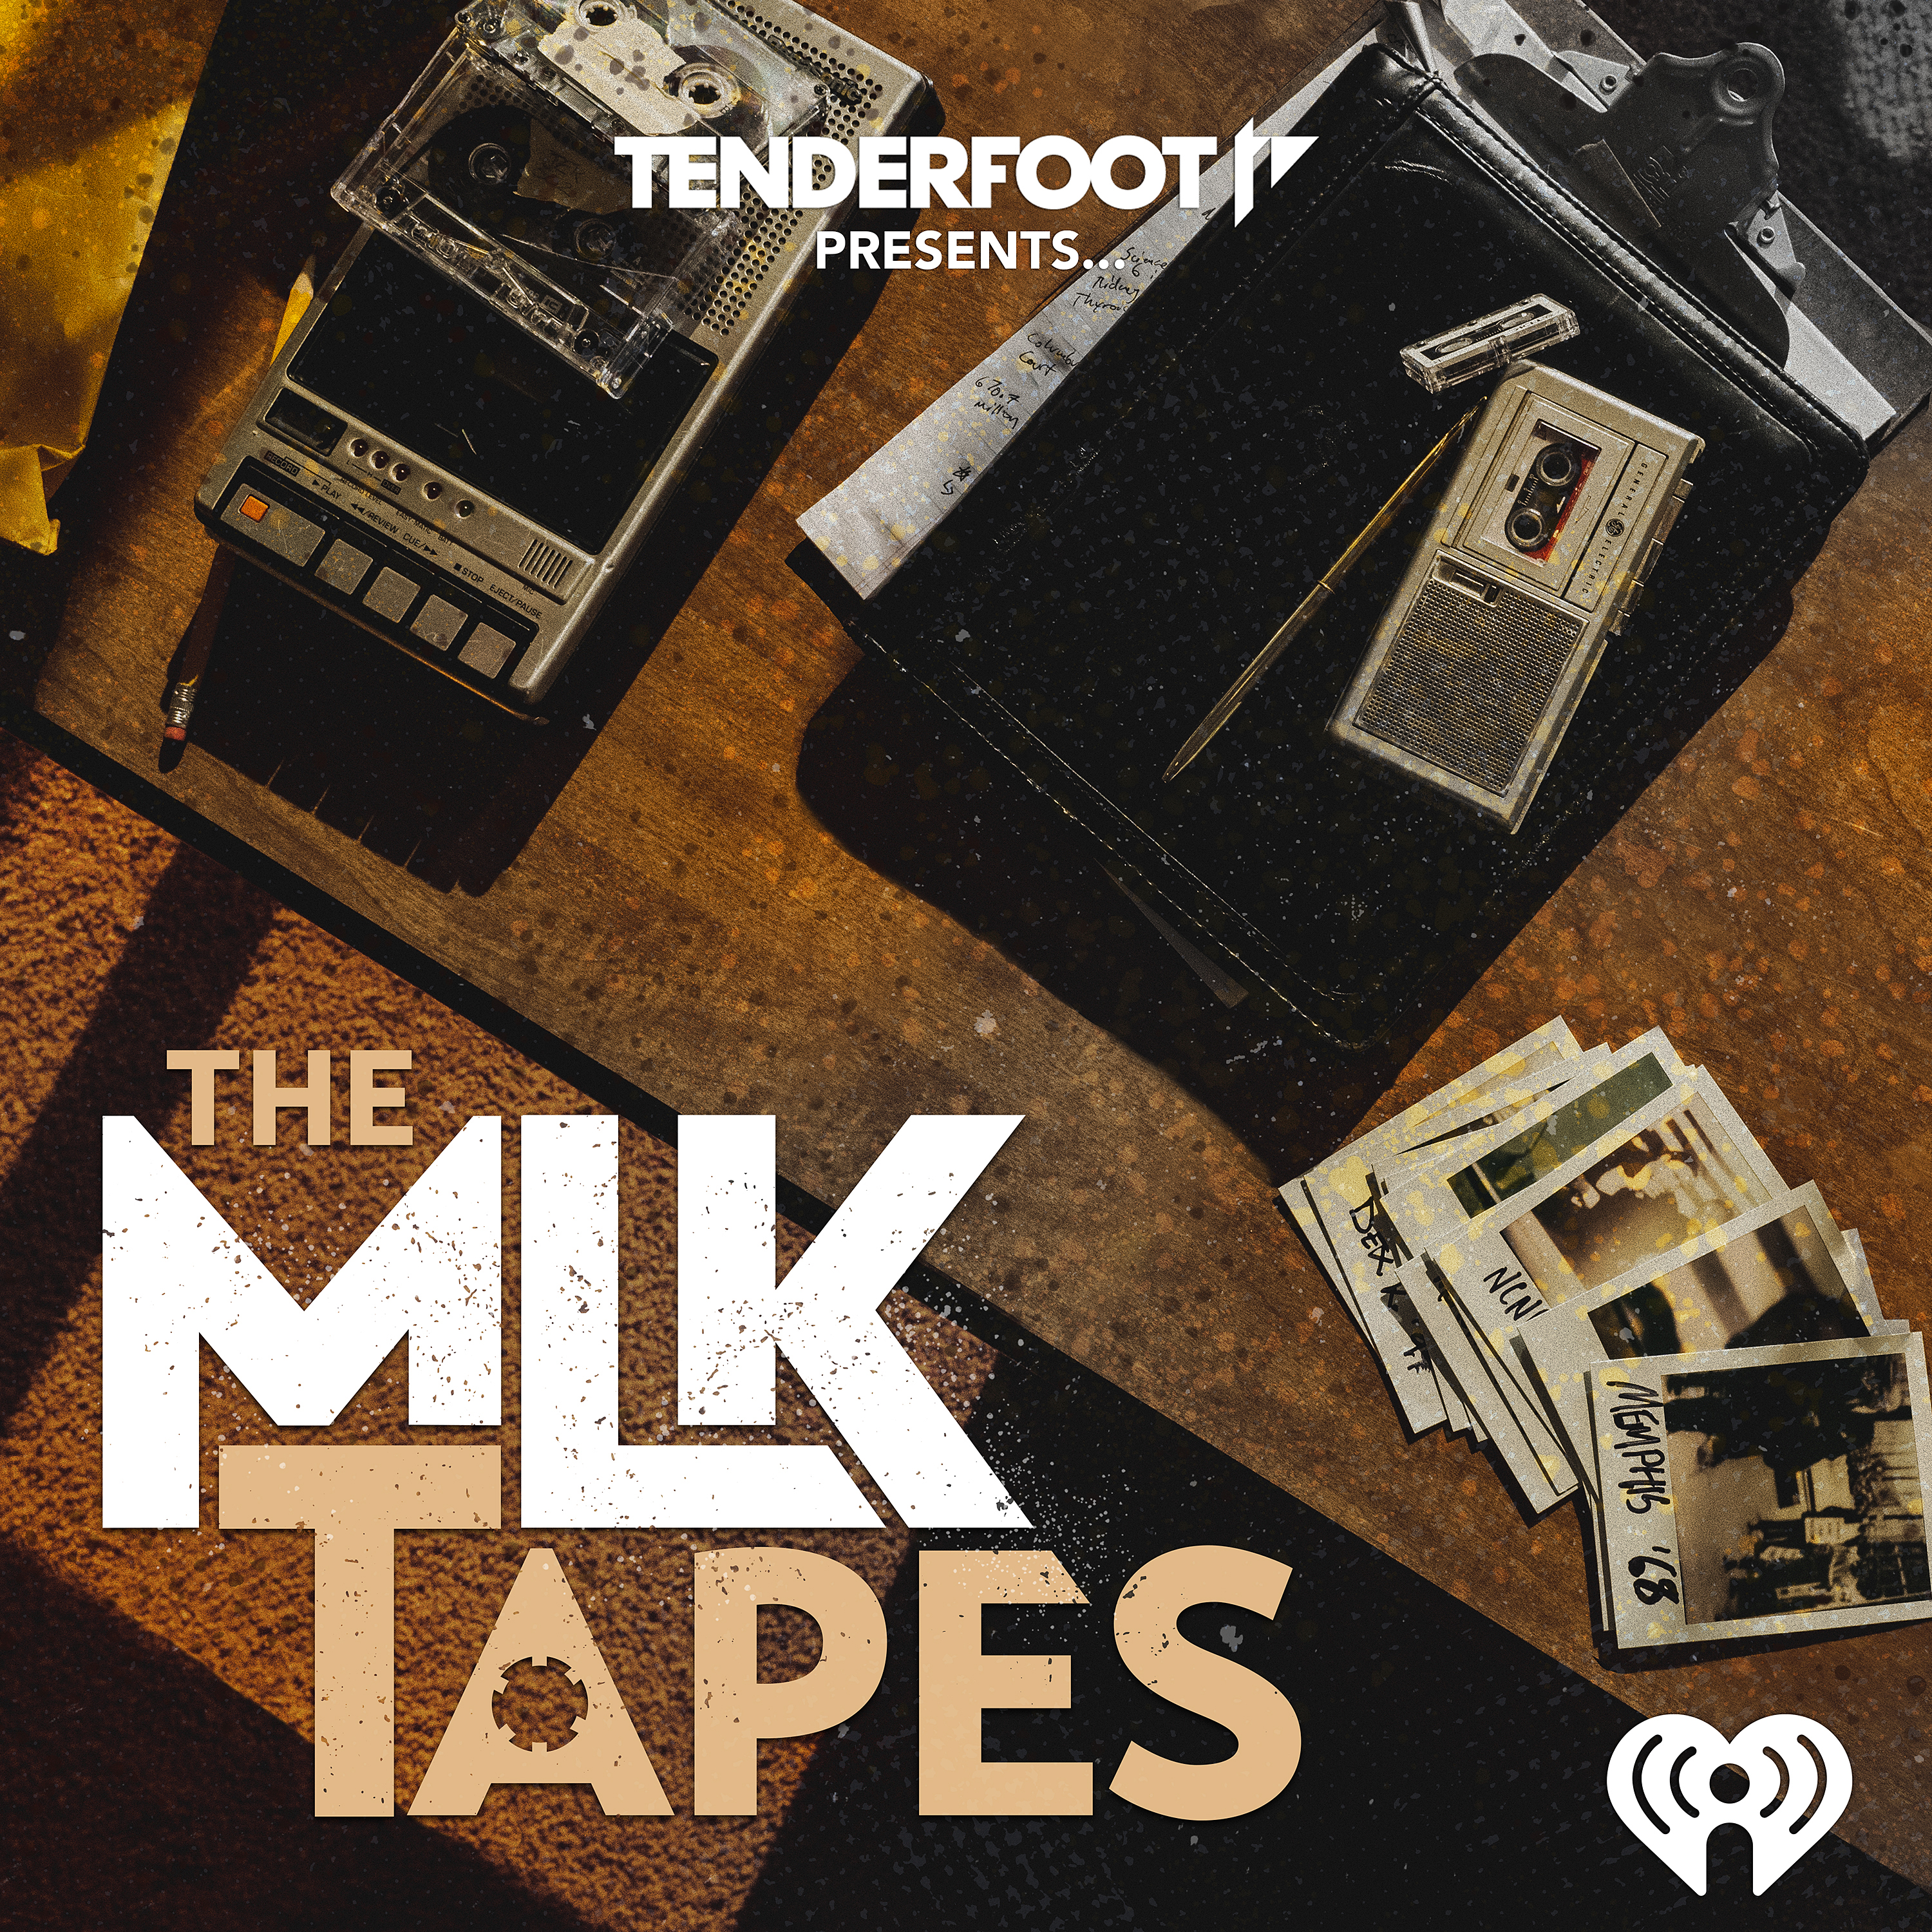 The MLK Tapes/Tenderfoot podcasts